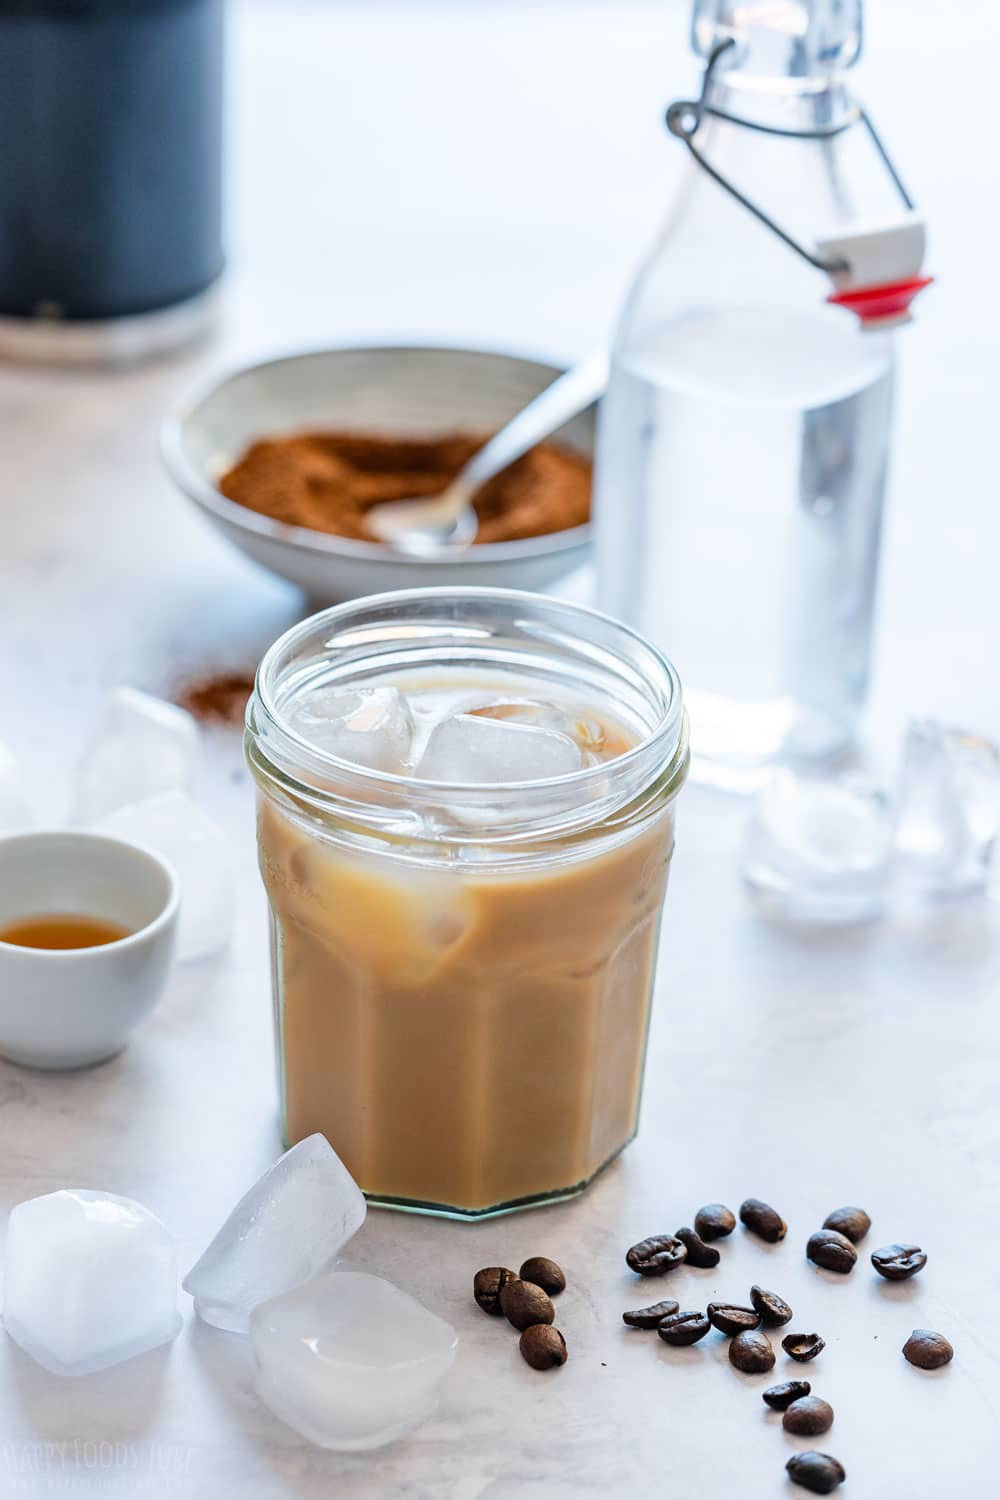 Refreshing and cooling iced latte with all the ingredients around.